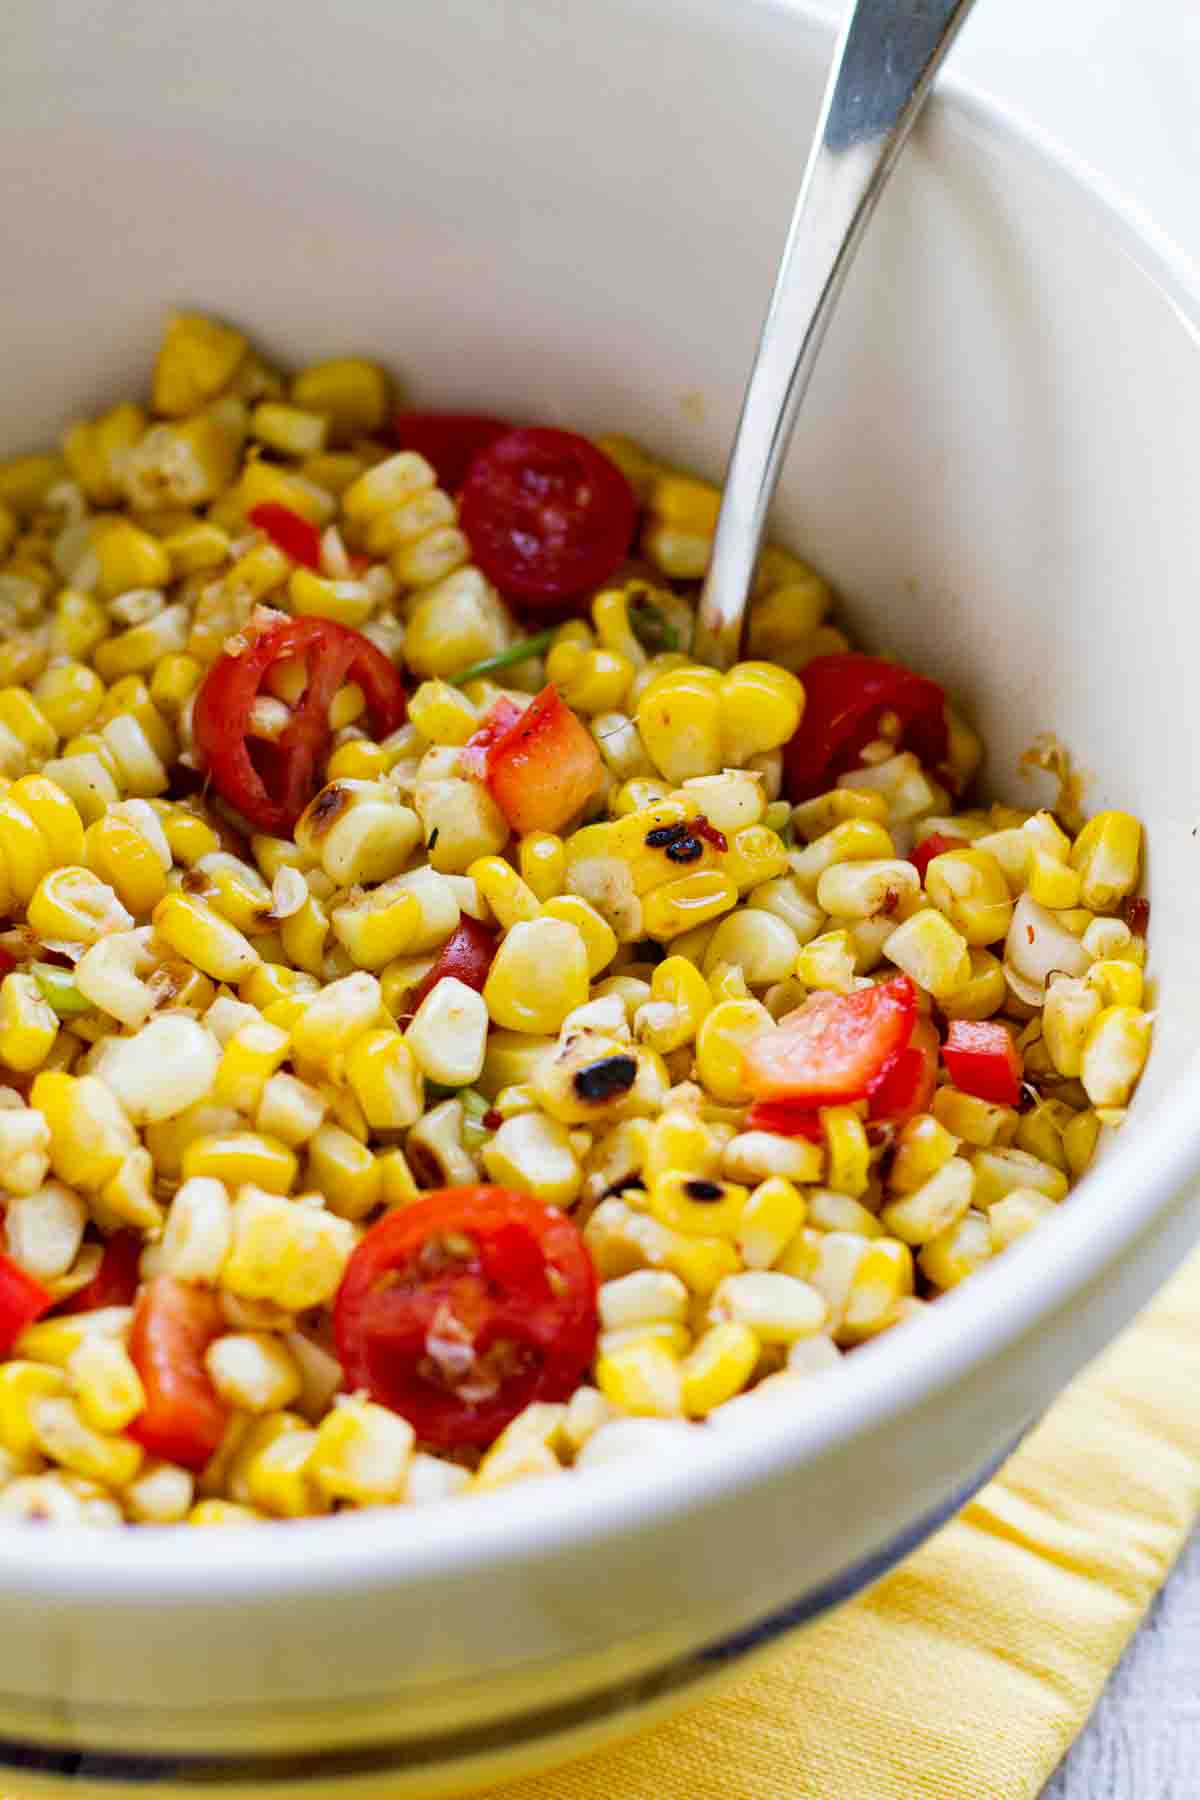 bowl filled with grilled corn salad with cherry tomatoes and peppers